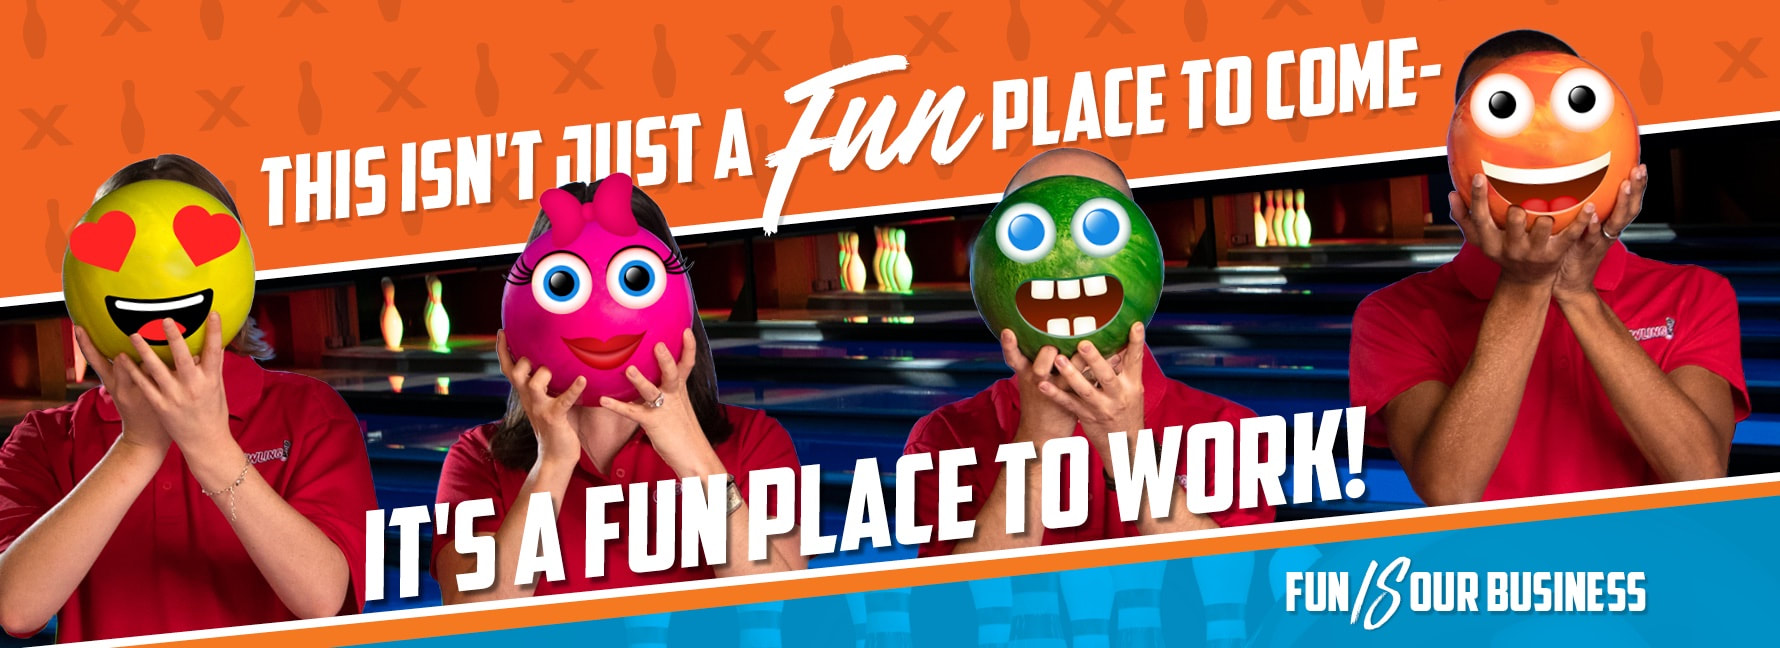 this isn't just a fun place to come - it's a fun place to work!